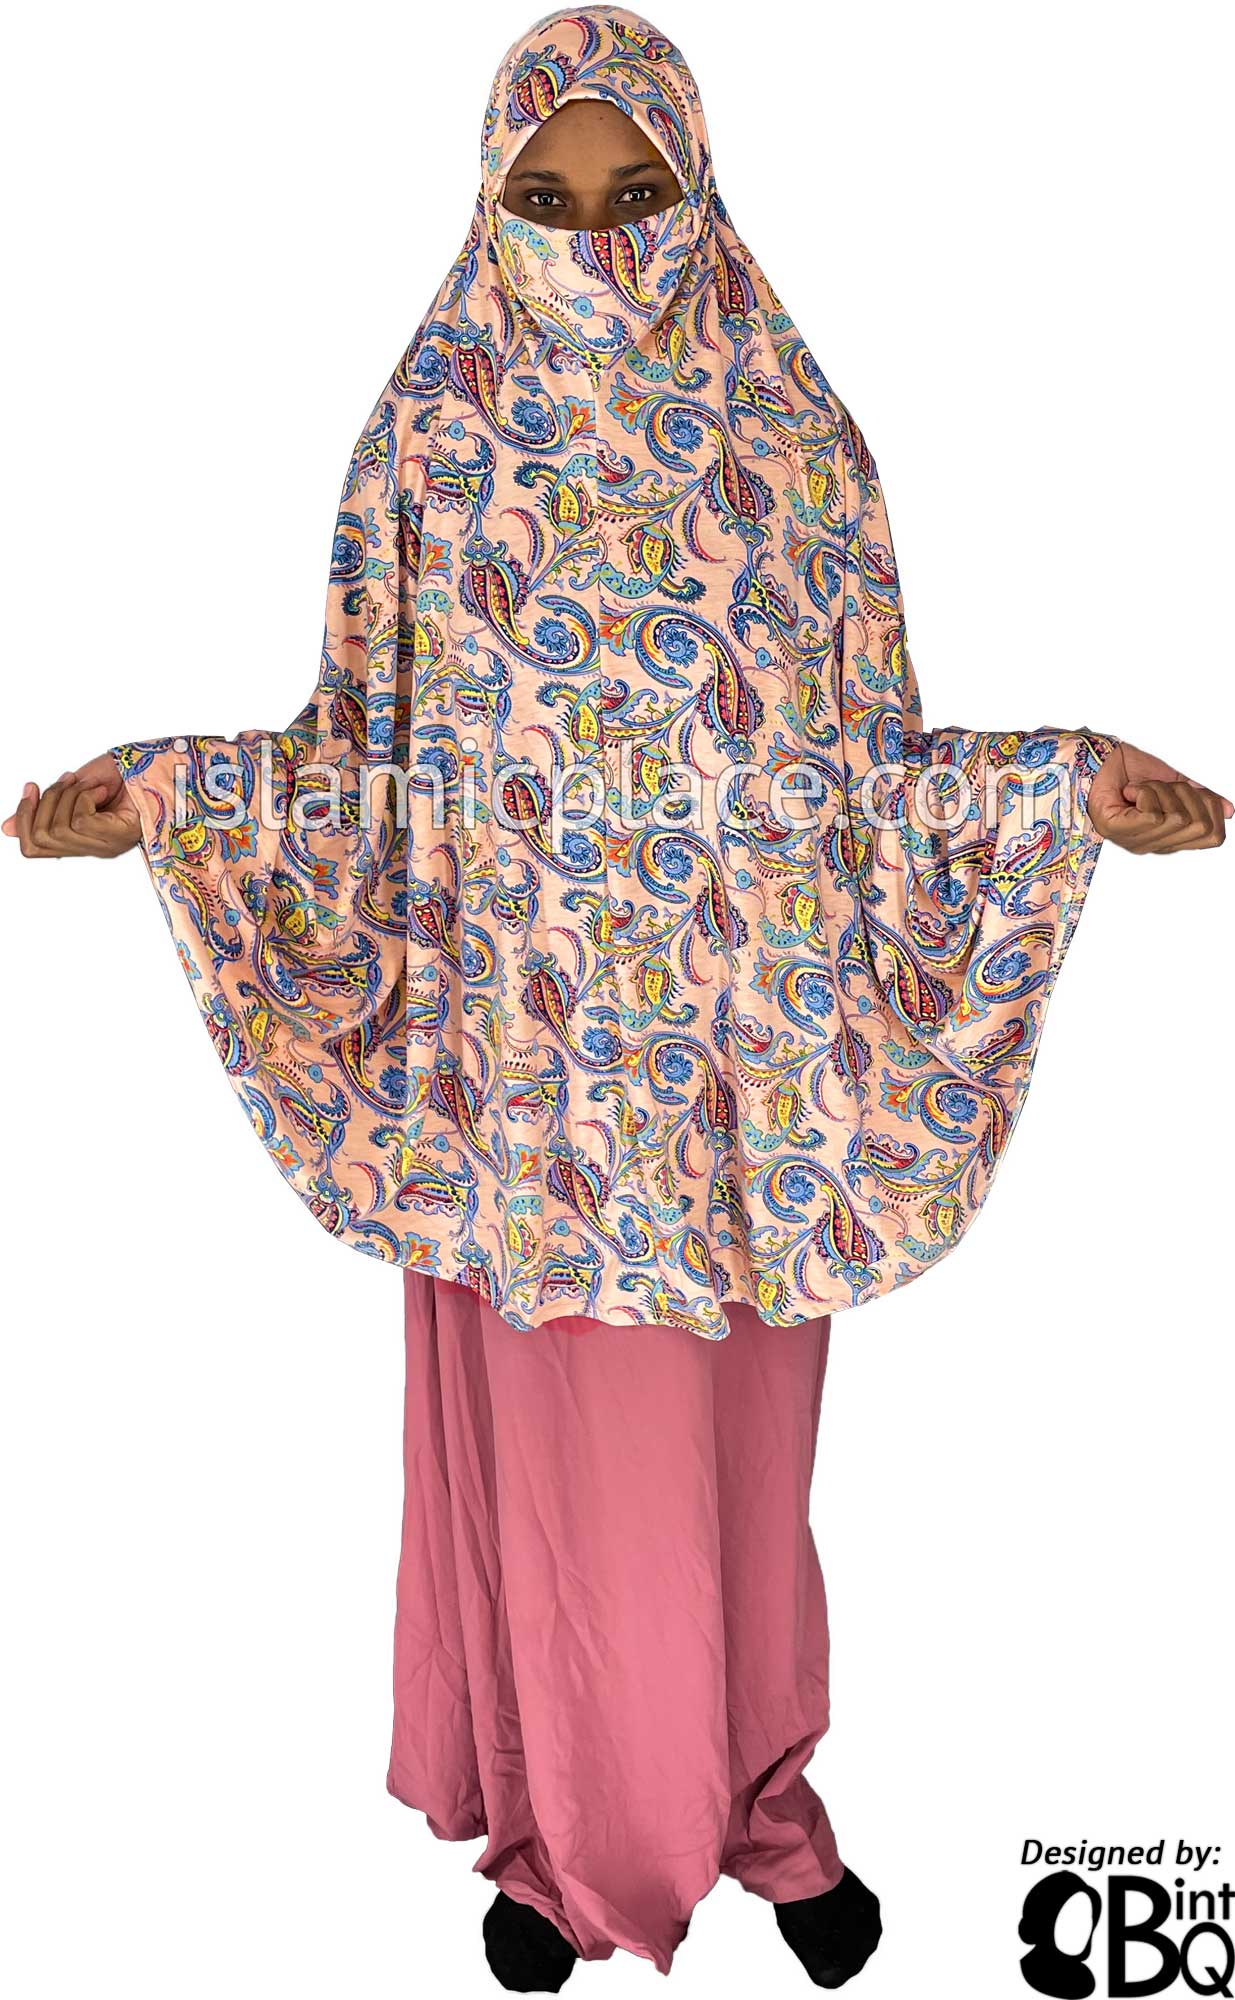 Sky Blue and Yellow Paisley on Pale Pink Base - Printed Overhead Khimar - Extra Long Knee Length